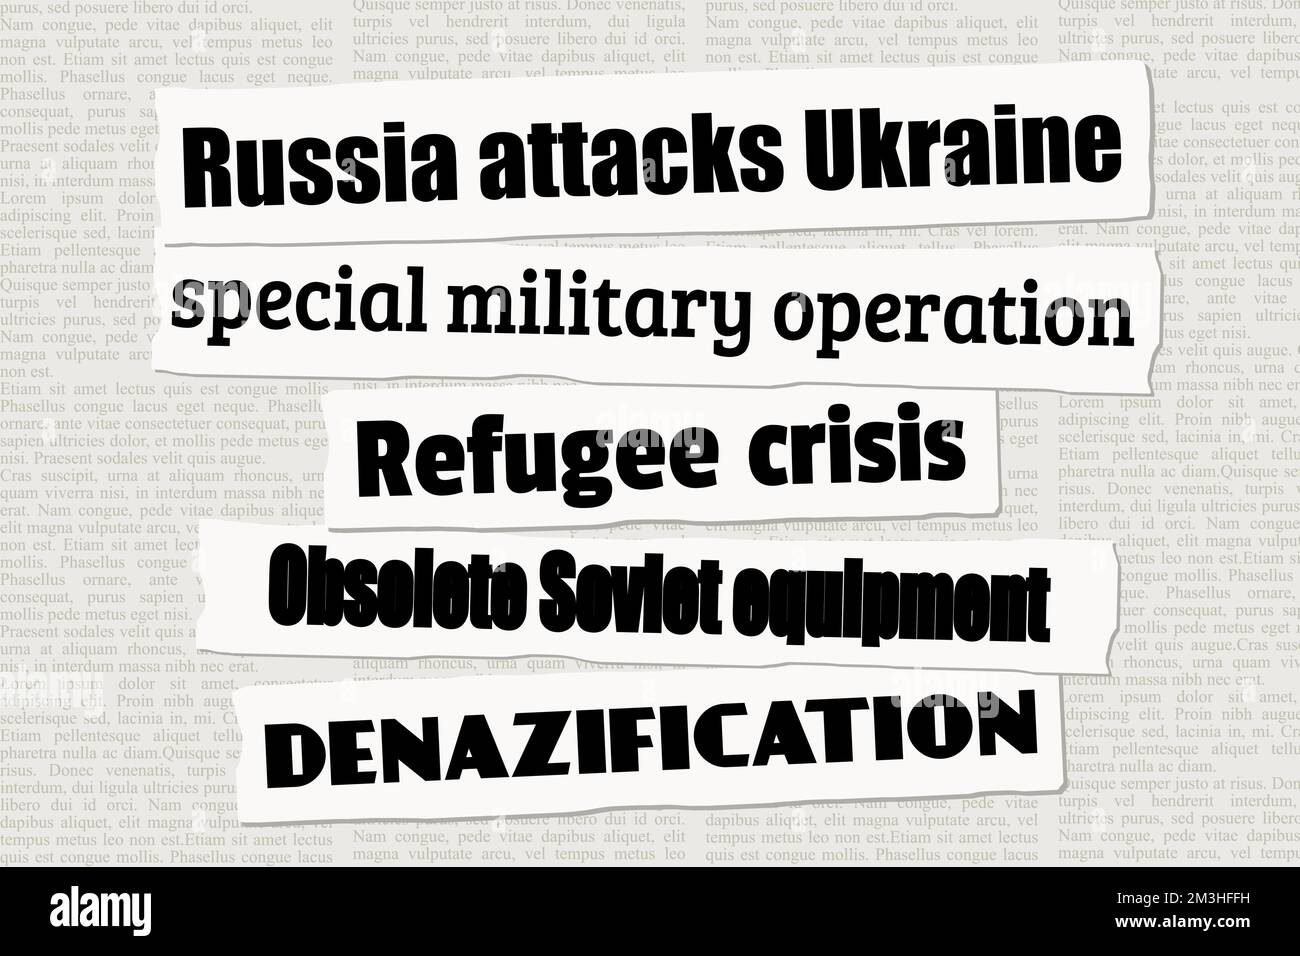 Russia Ukraine invasion news headlines. Newspaper clippings about Russia Ukraine war and refugee crisis. Stock Vector